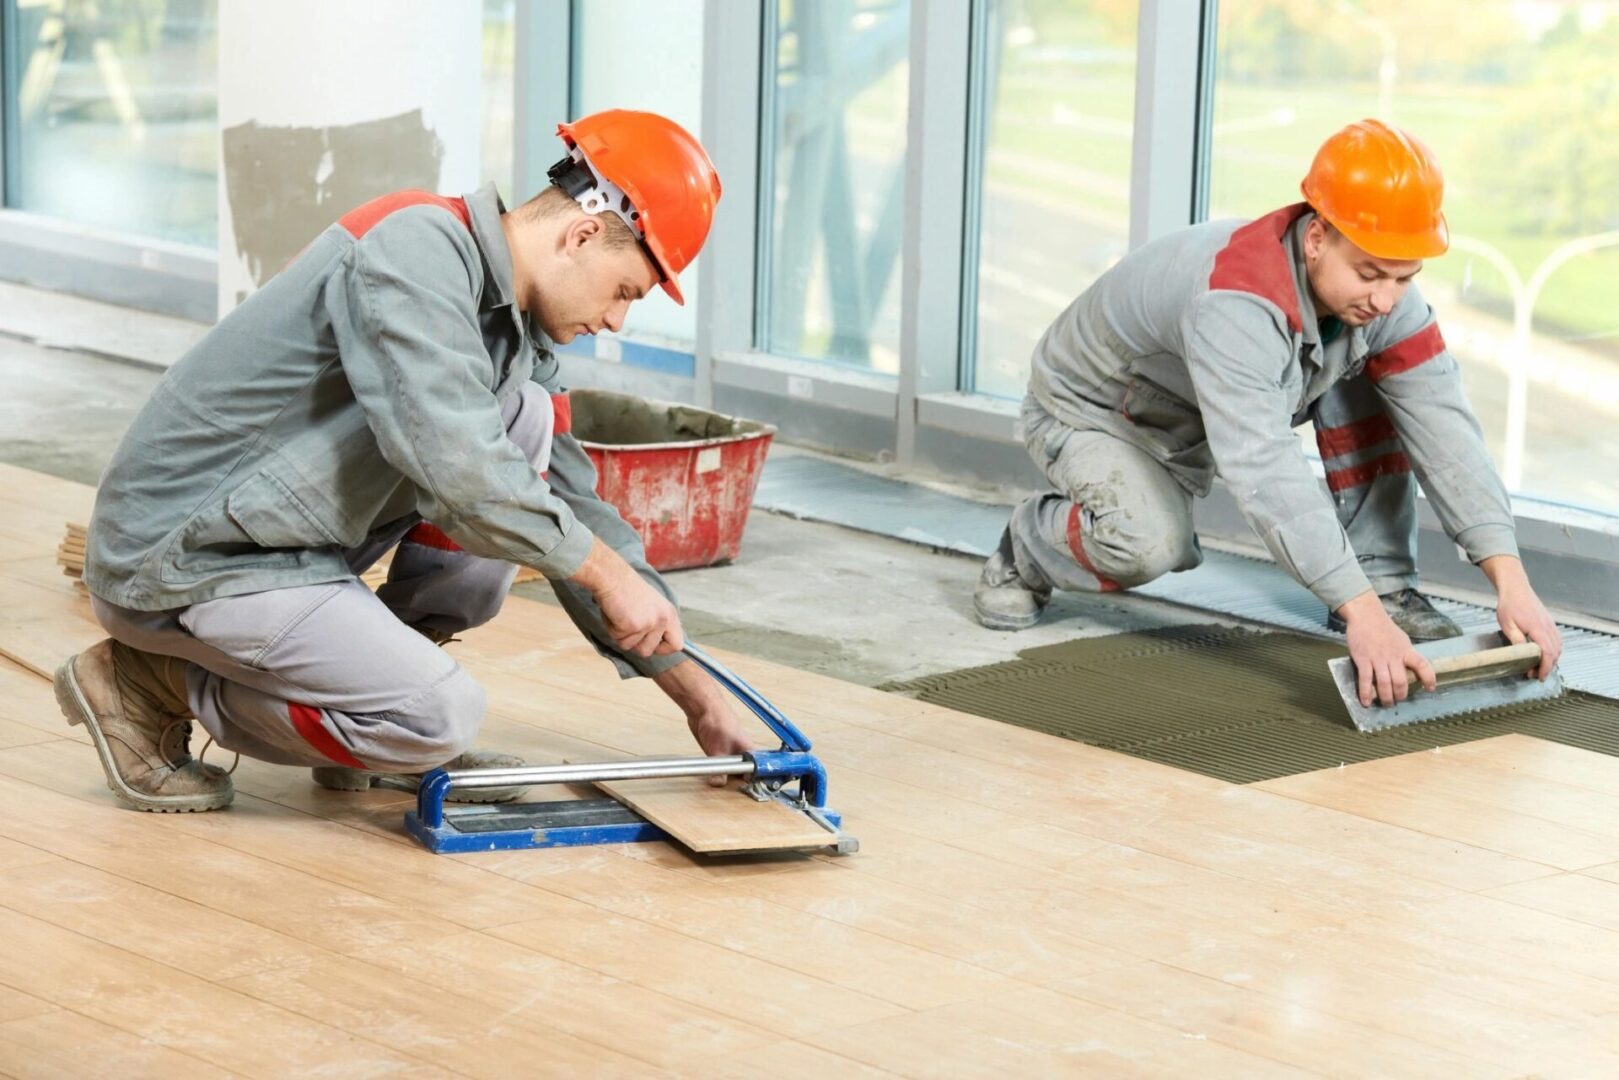 Two men in construction hats are working on a floor.